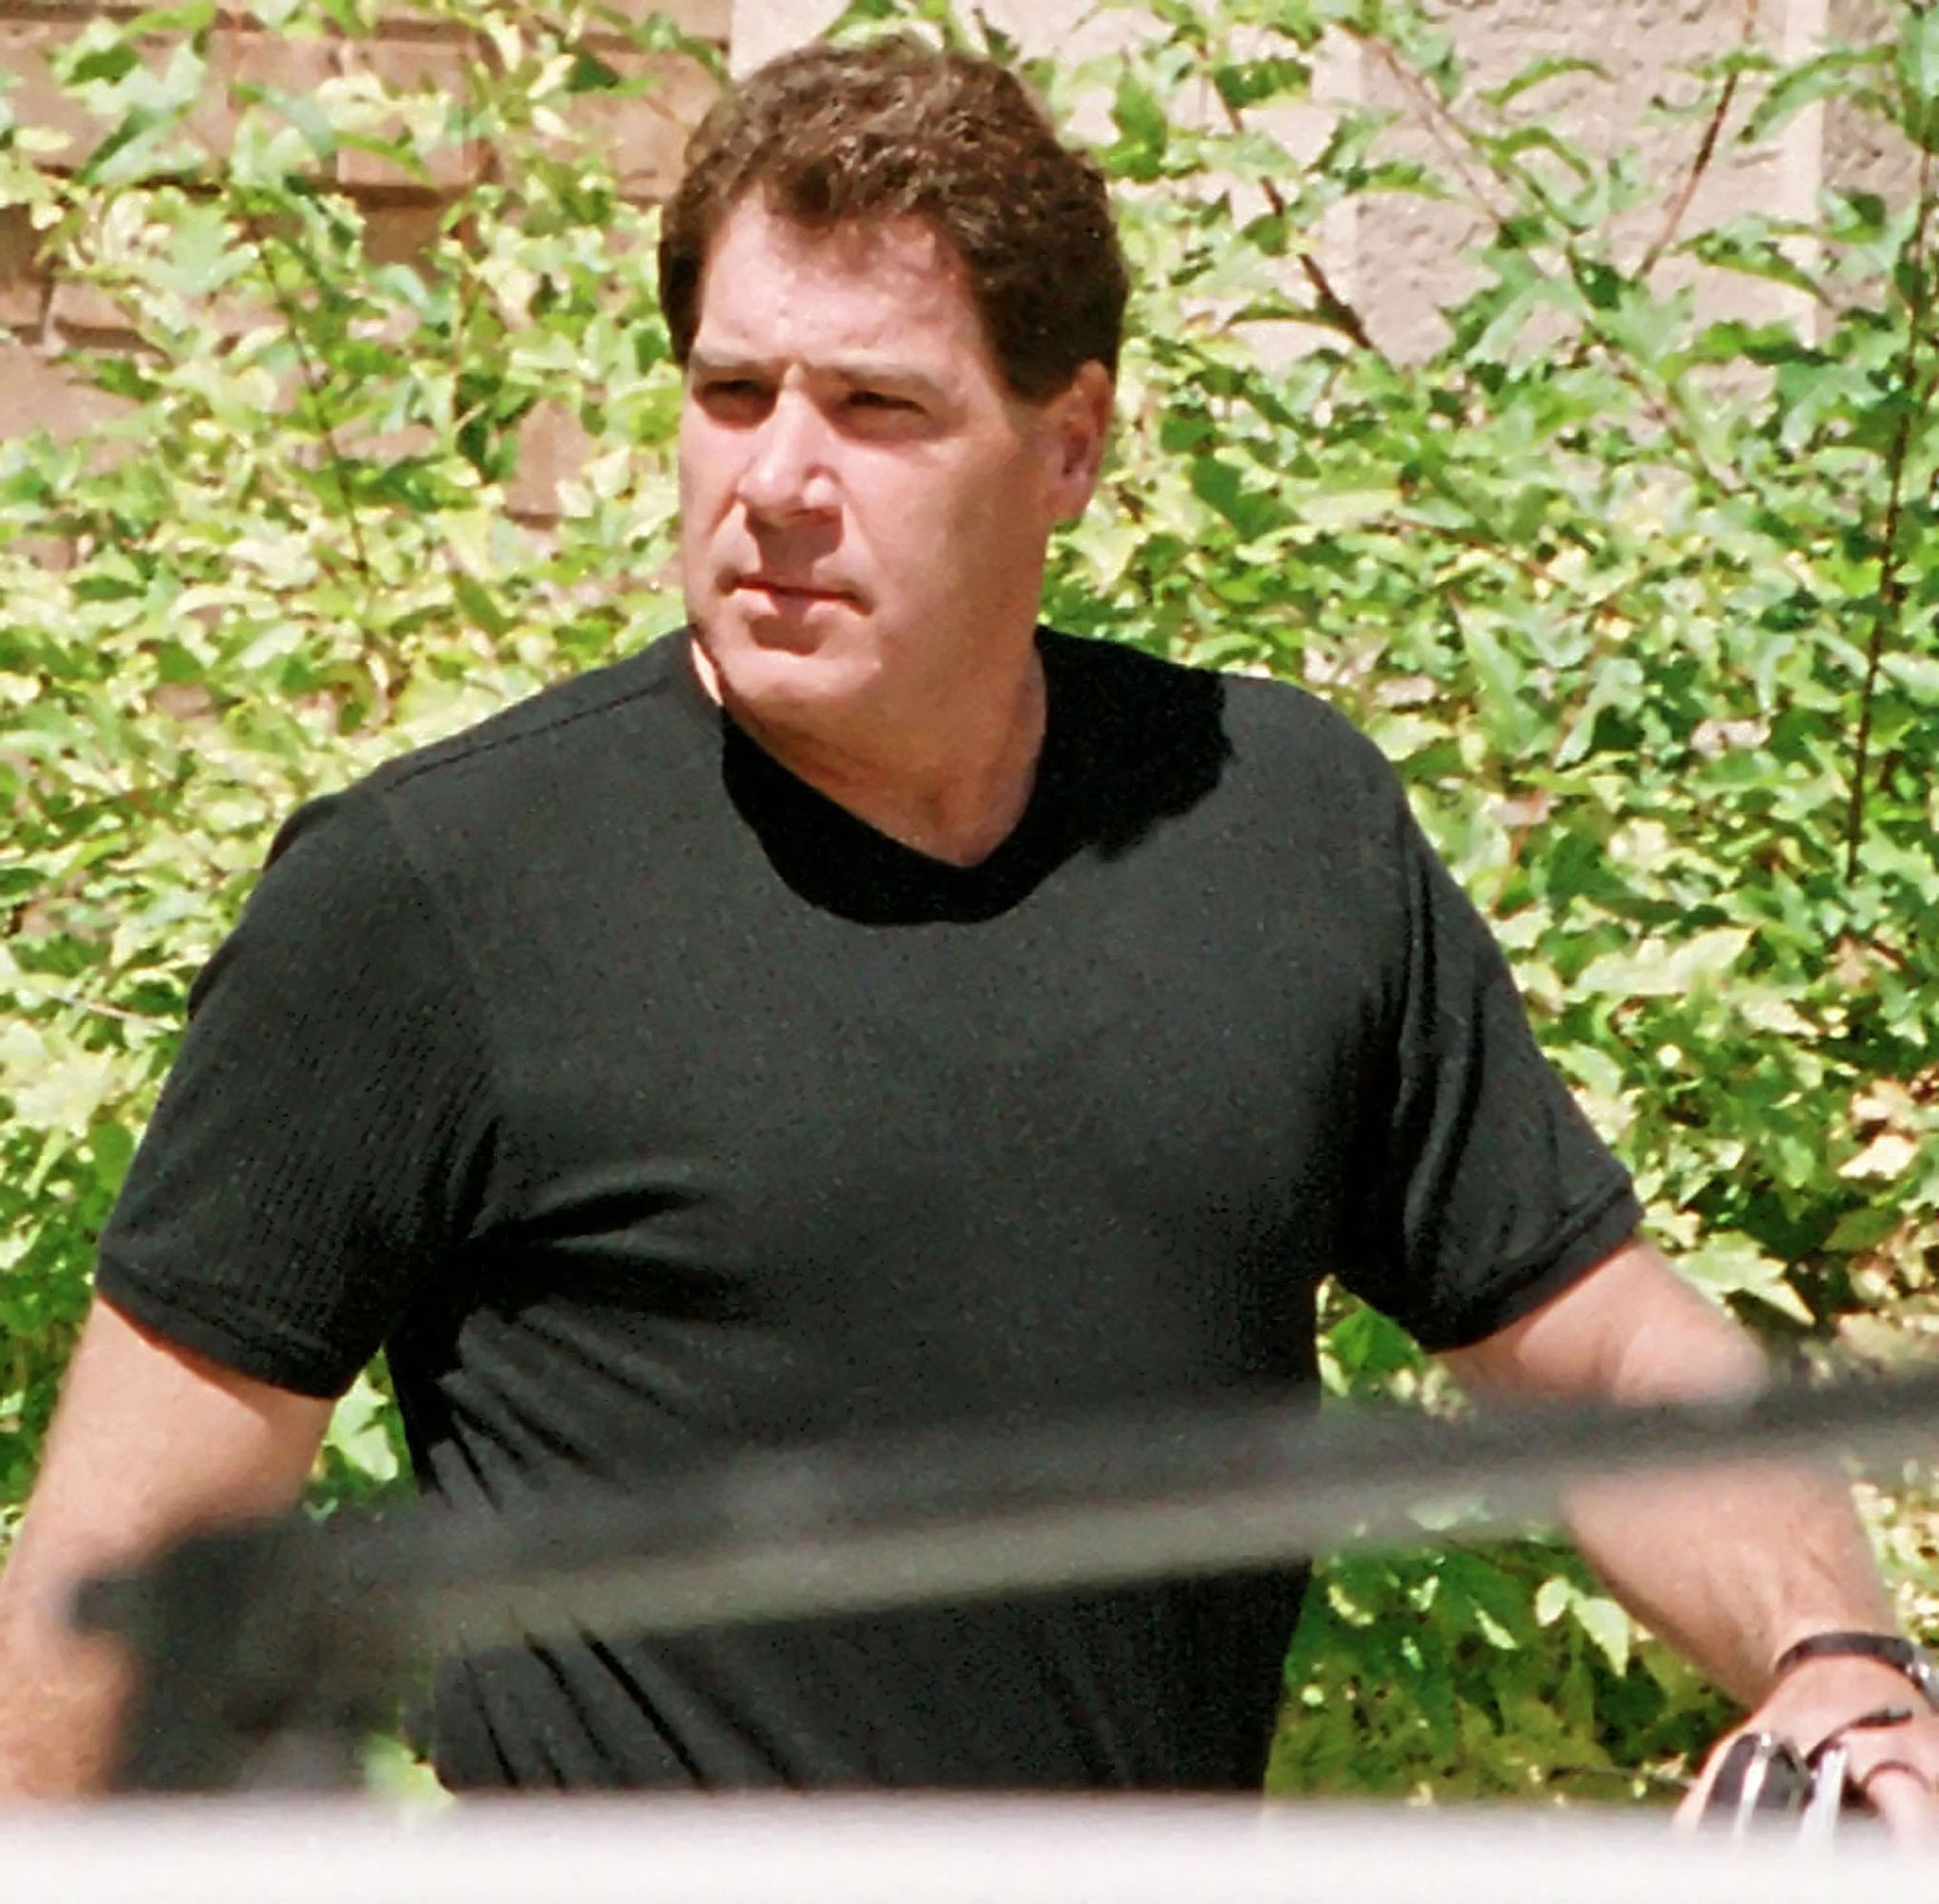 Brian Blosil leaving his home August 26, 2000 in Provo, Utah. | Source: Getty Images